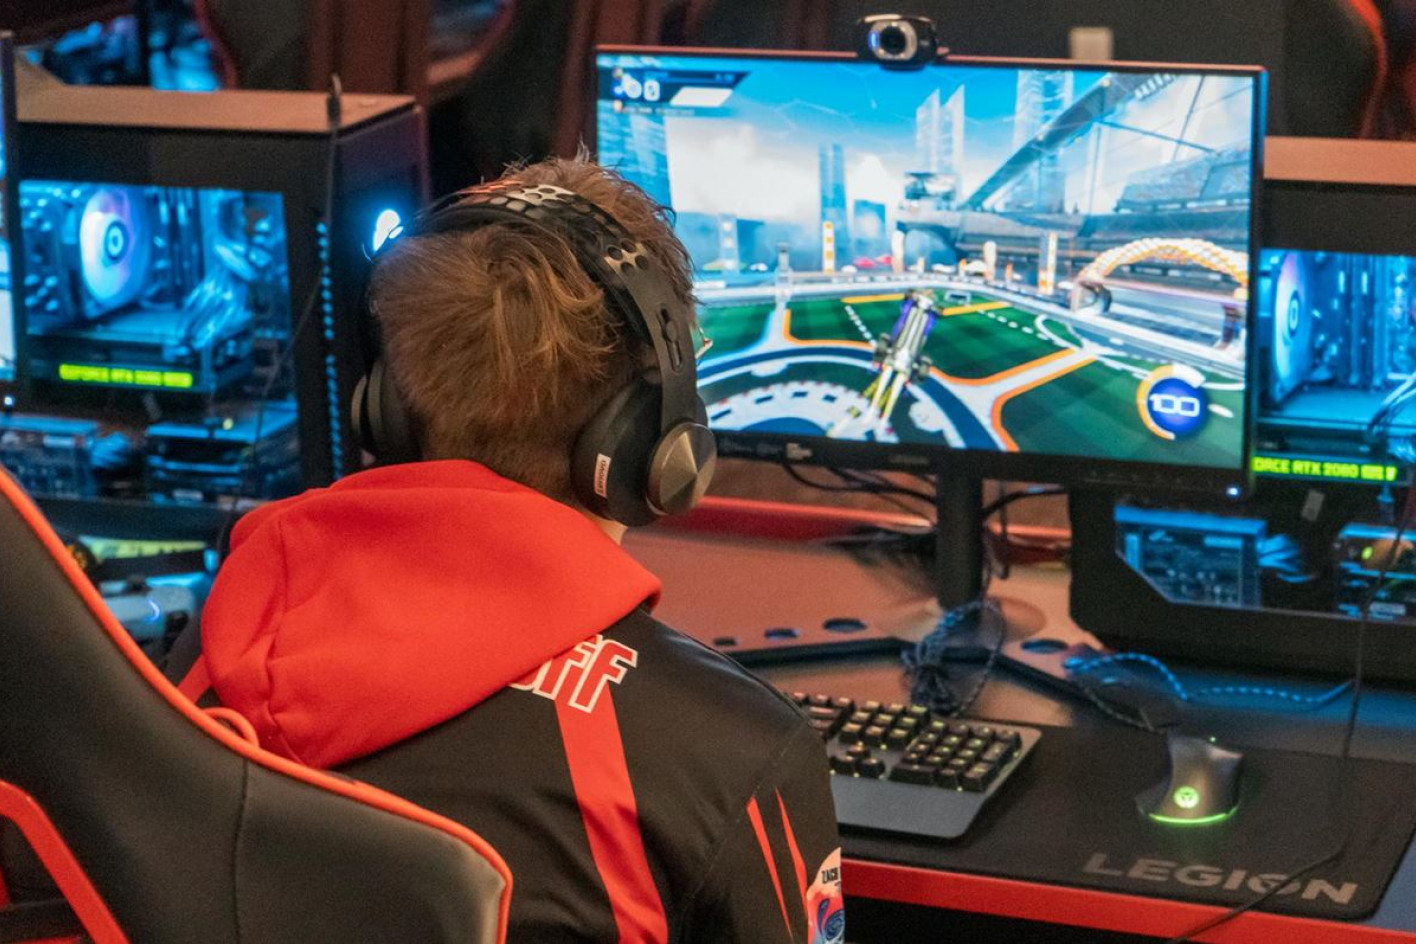 In their inaugural season, Carthage esports won the NECC Conference Title in Rocket League.